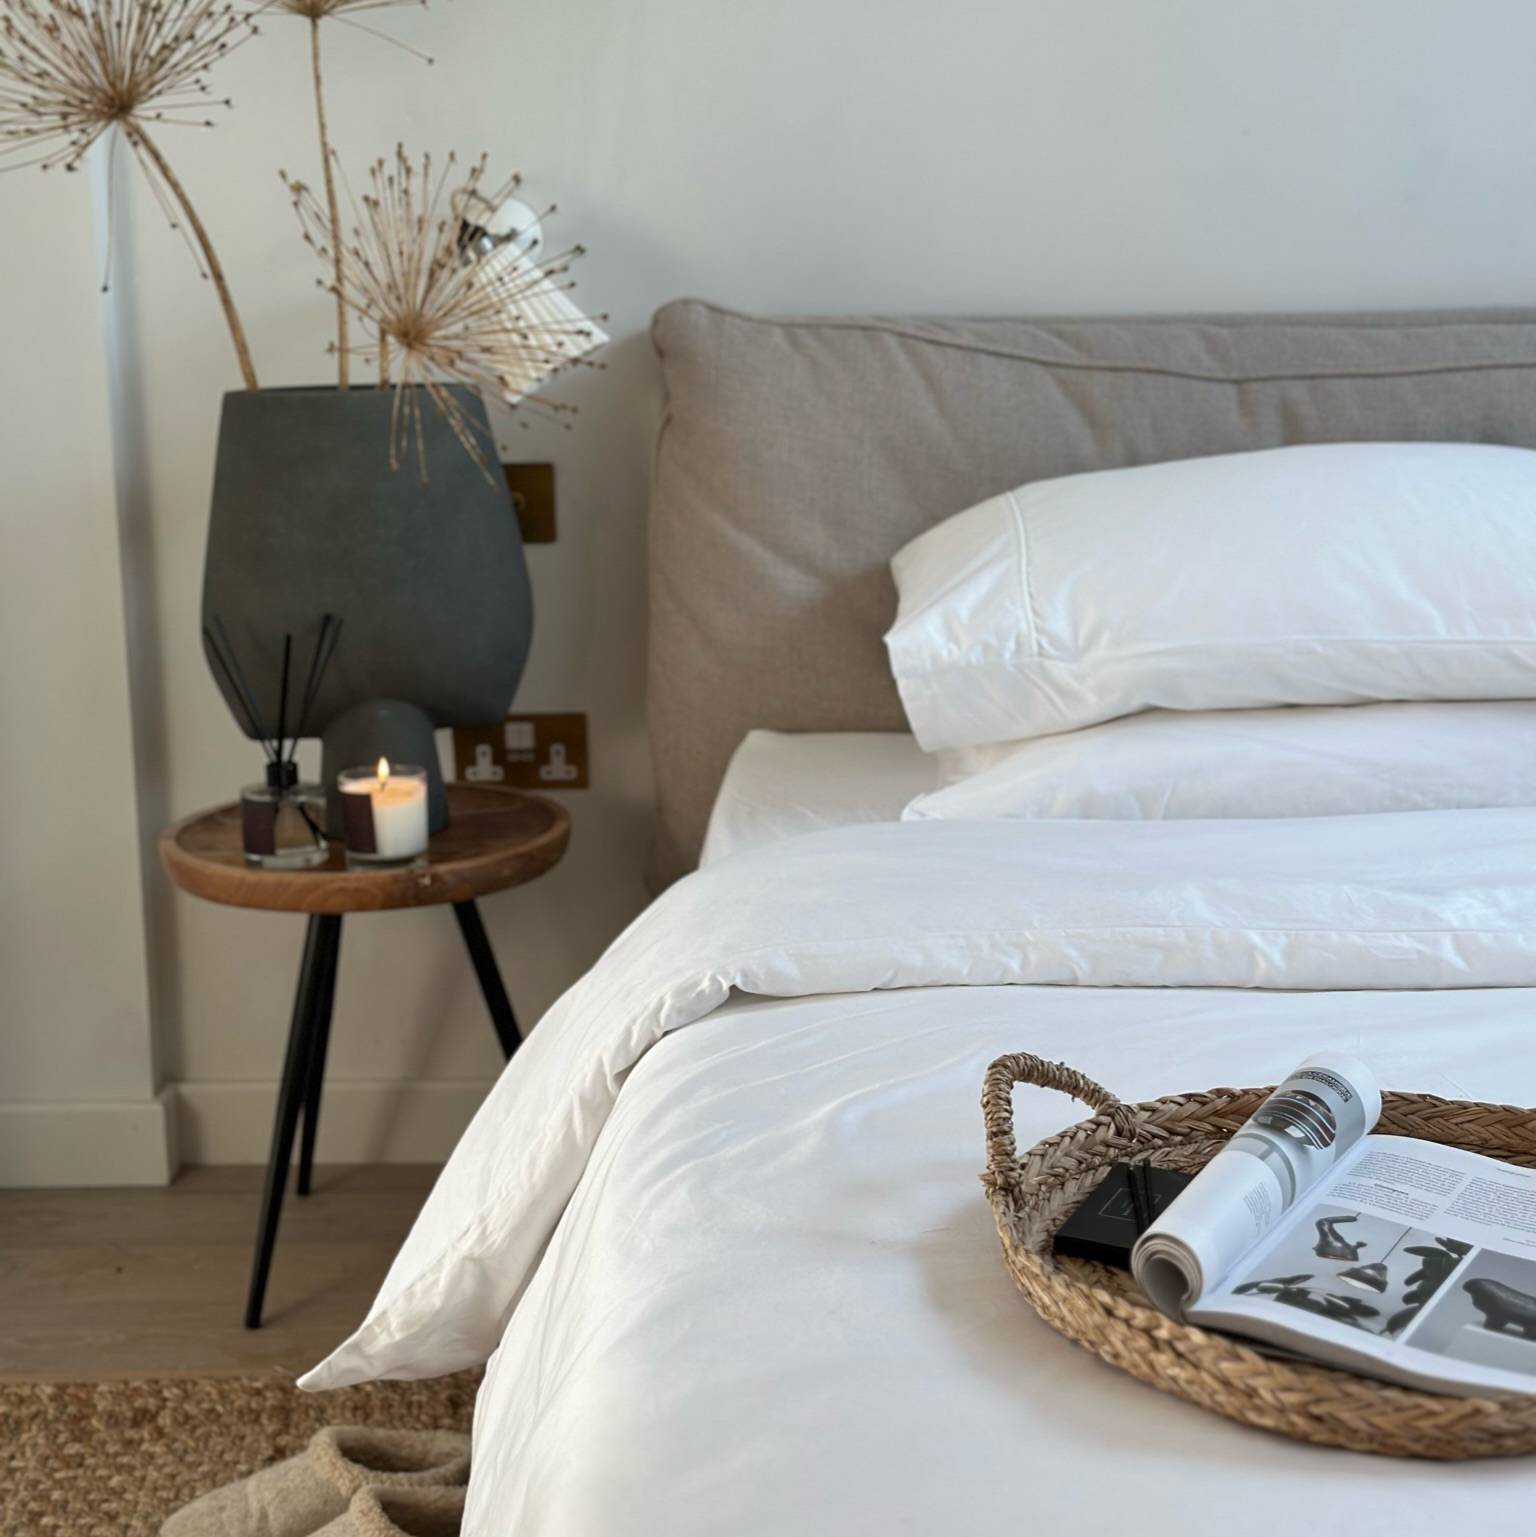 Inside Story bedding with the good housekeeping logo